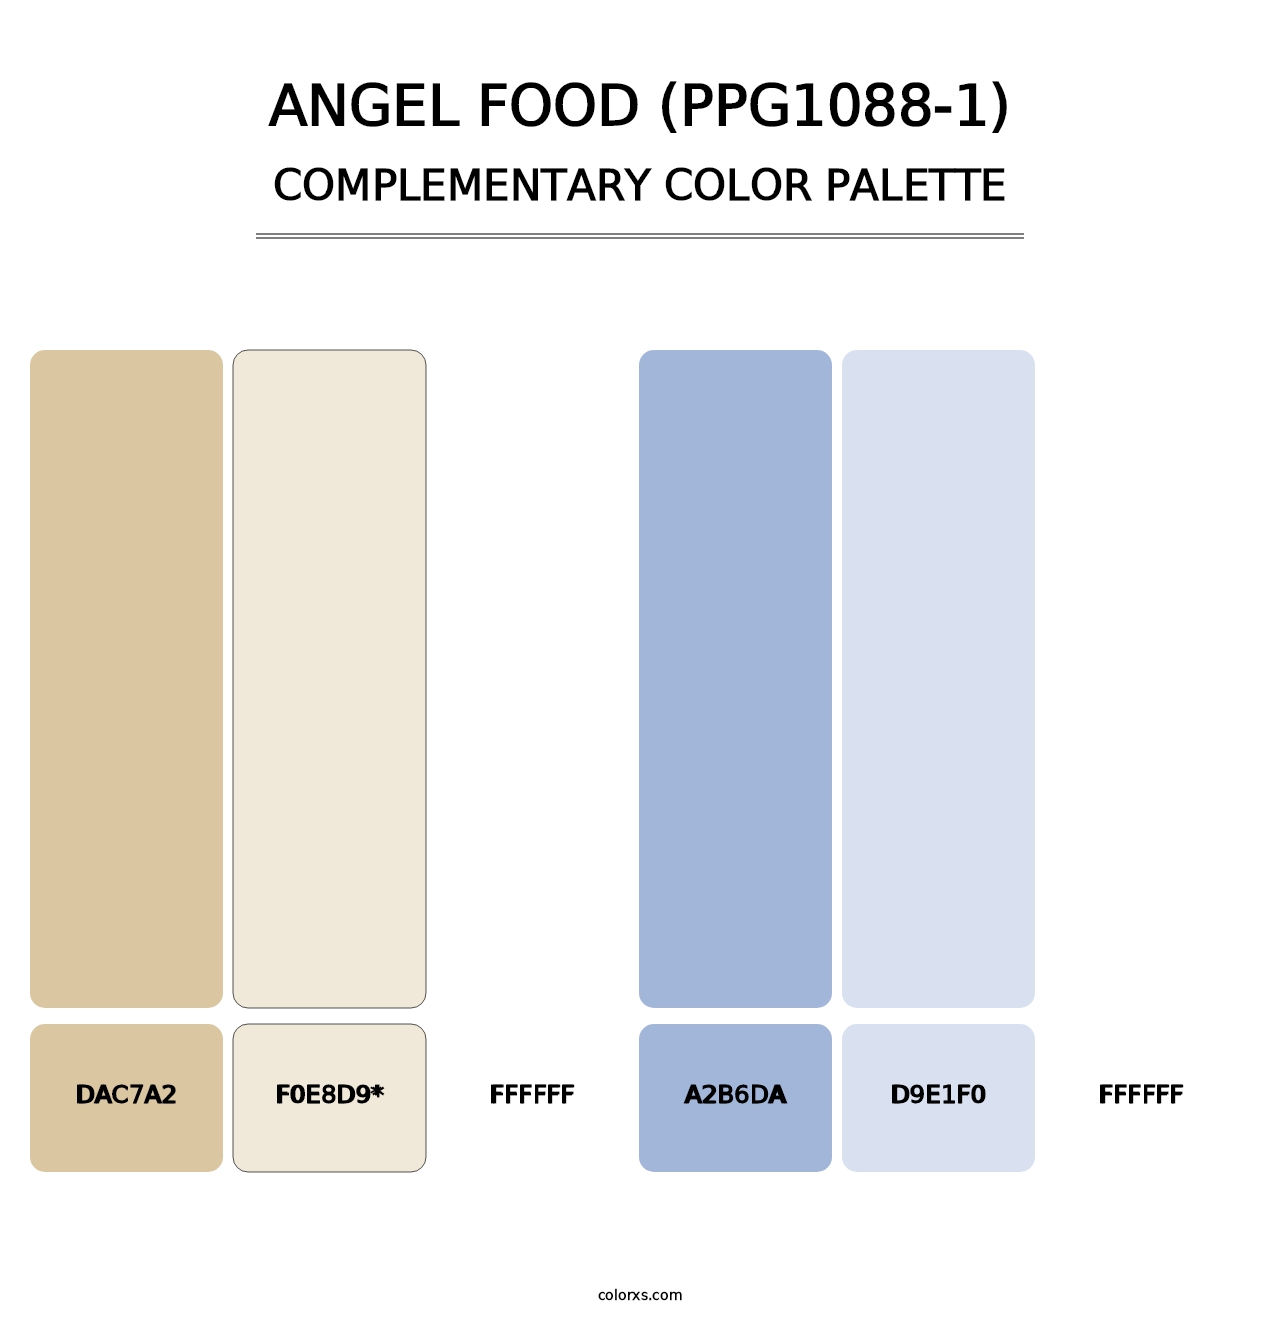 Angel Food (PPG1088-1) - Complementary Color Palette